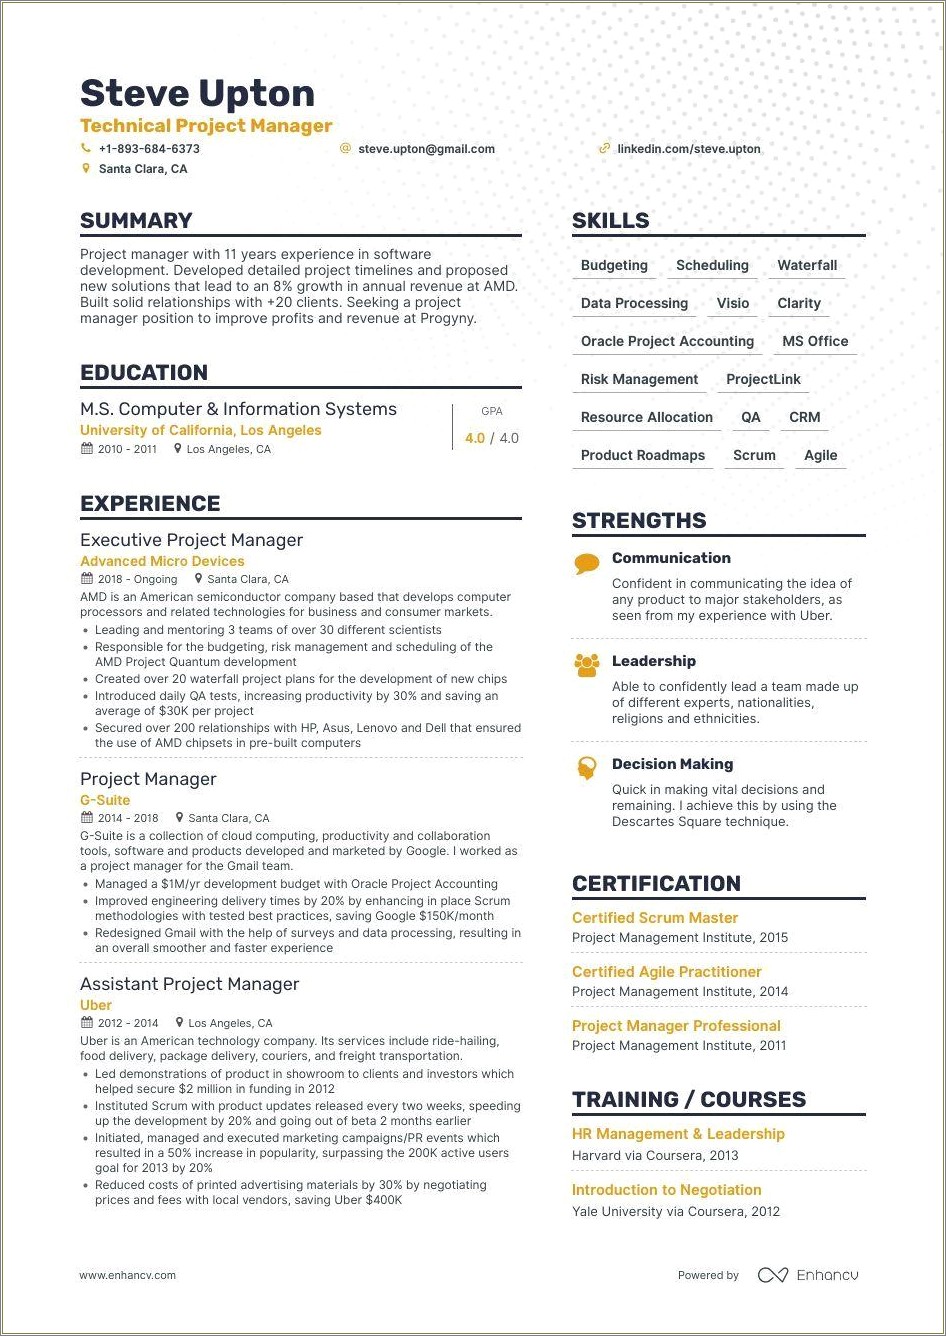 Sample Resume For Epc Project Manager